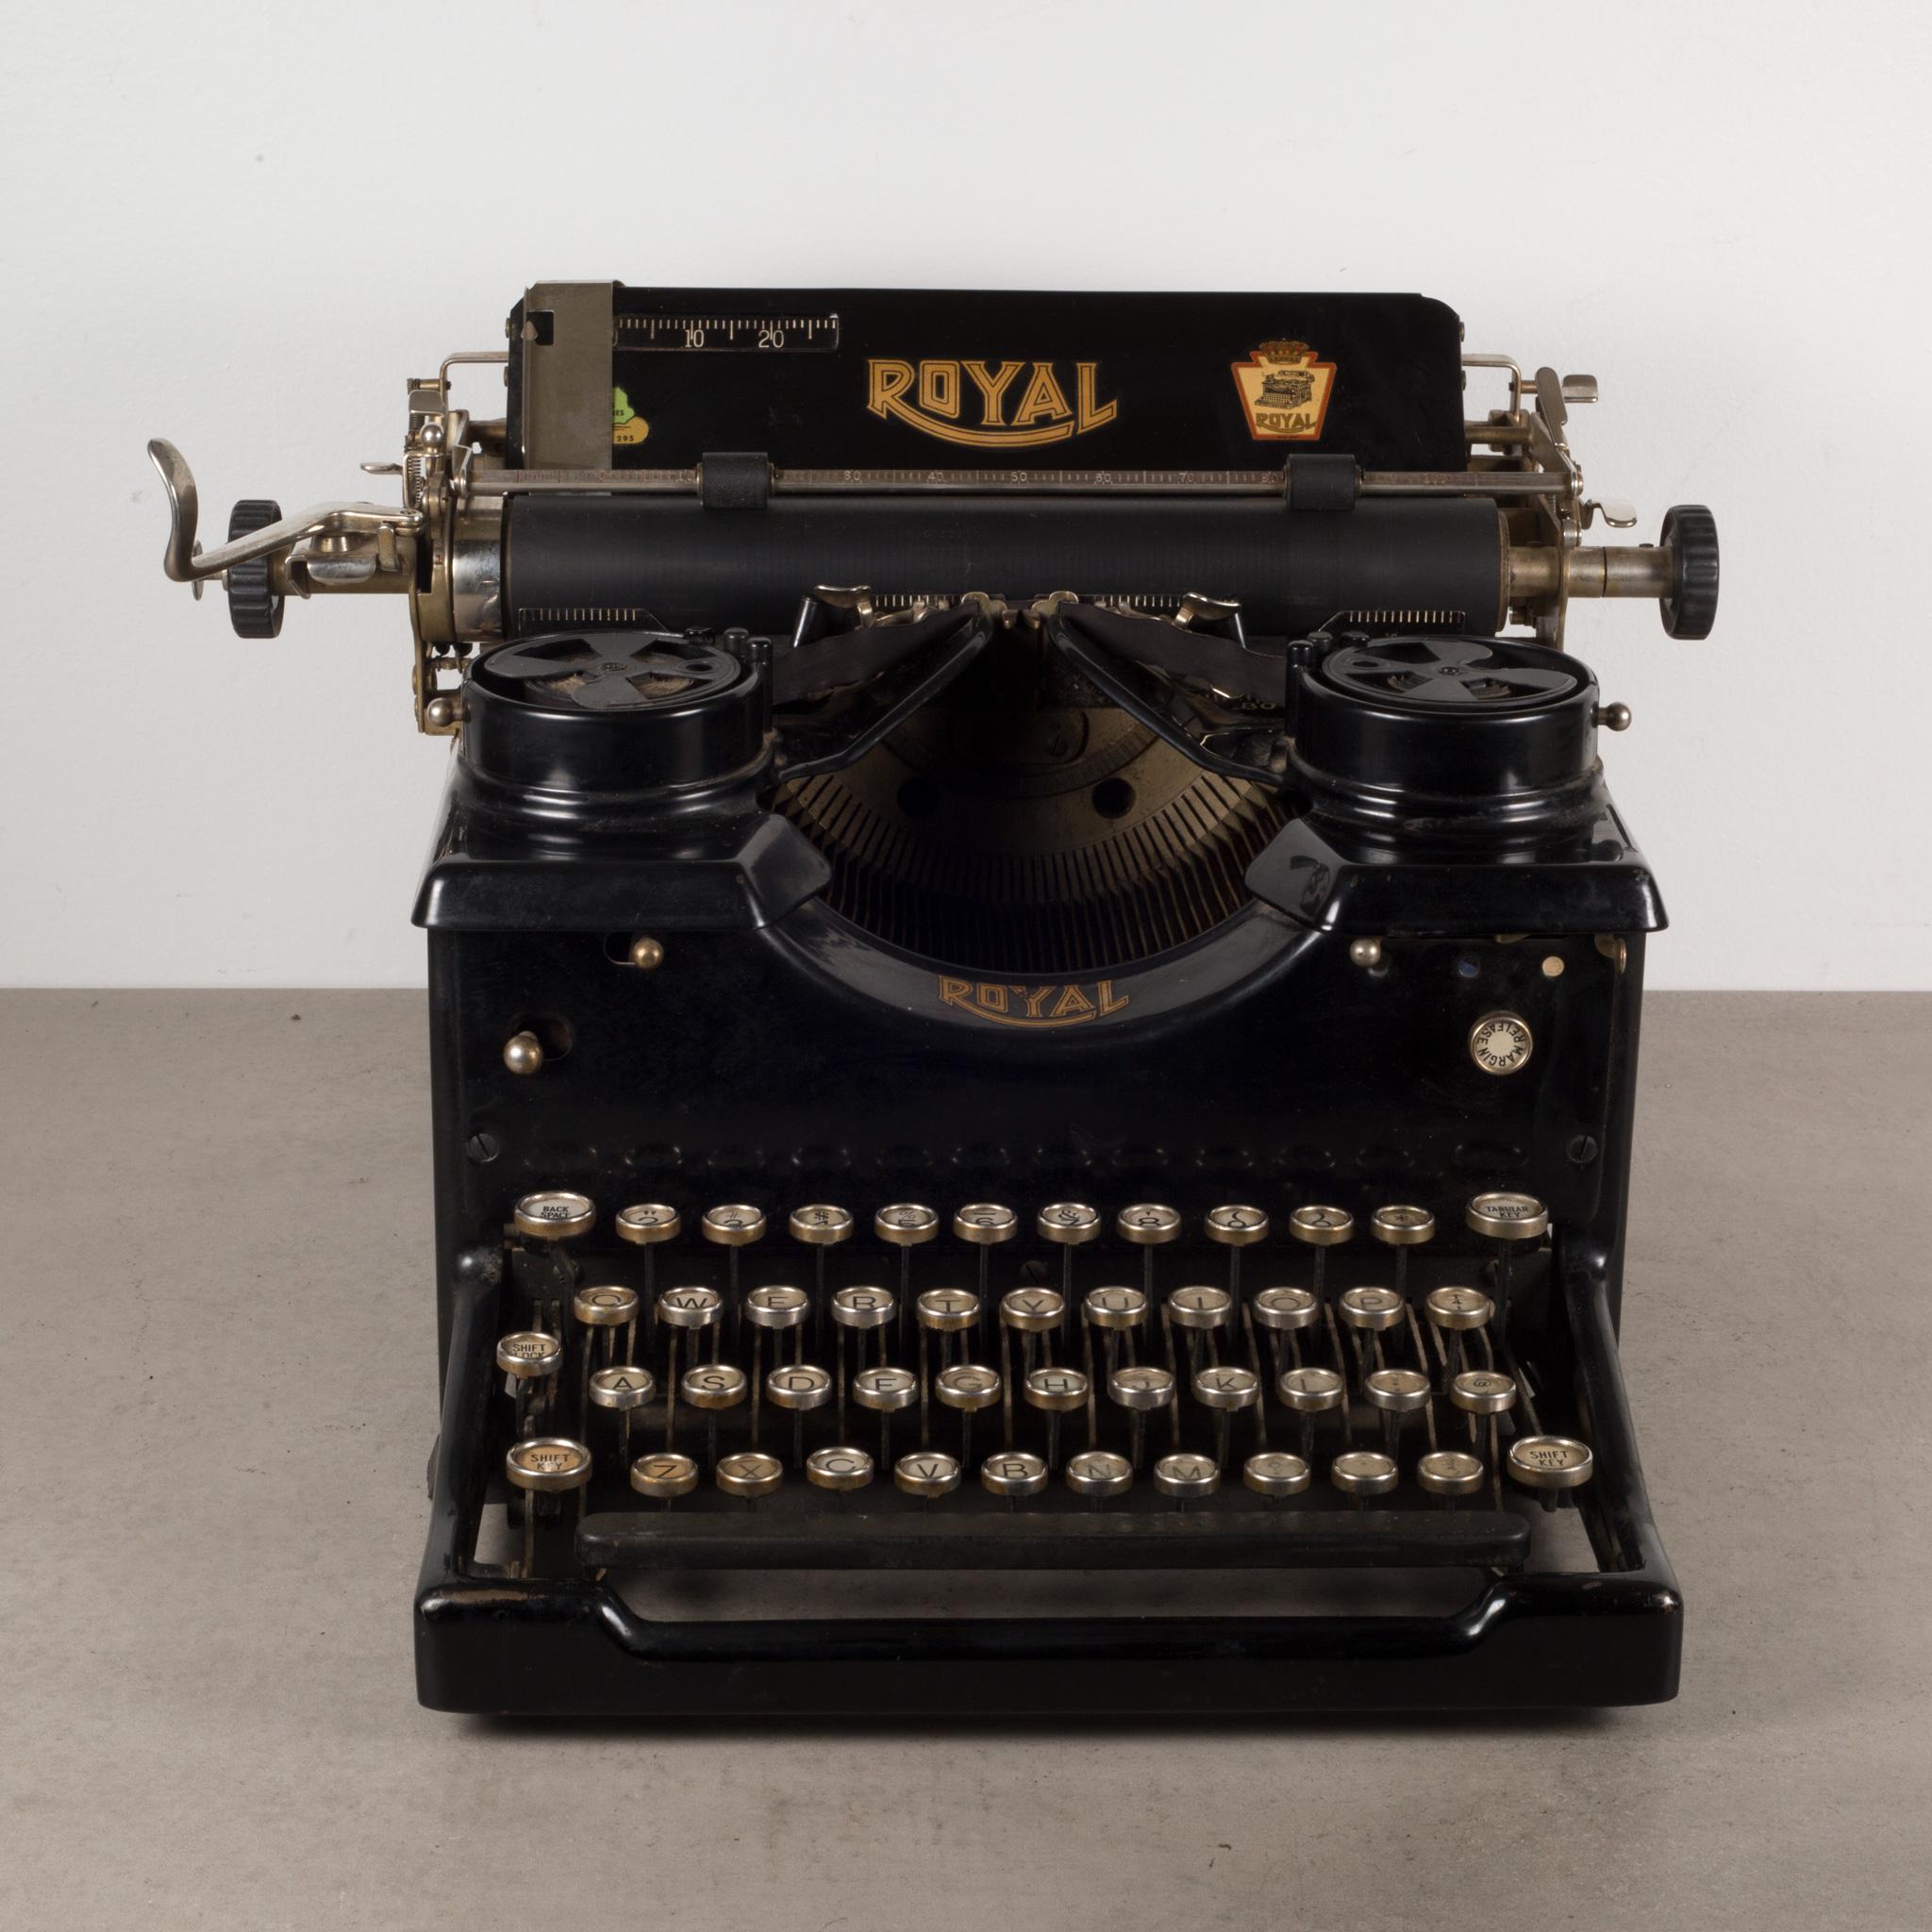 ABOUT

An antique Royal Standard No.5 typewriter with glass panels on each side. Nickel keys with black and white letters. This typewriter has smooth typing and the space bar function well. The carriage functions properly. Ribbon needs